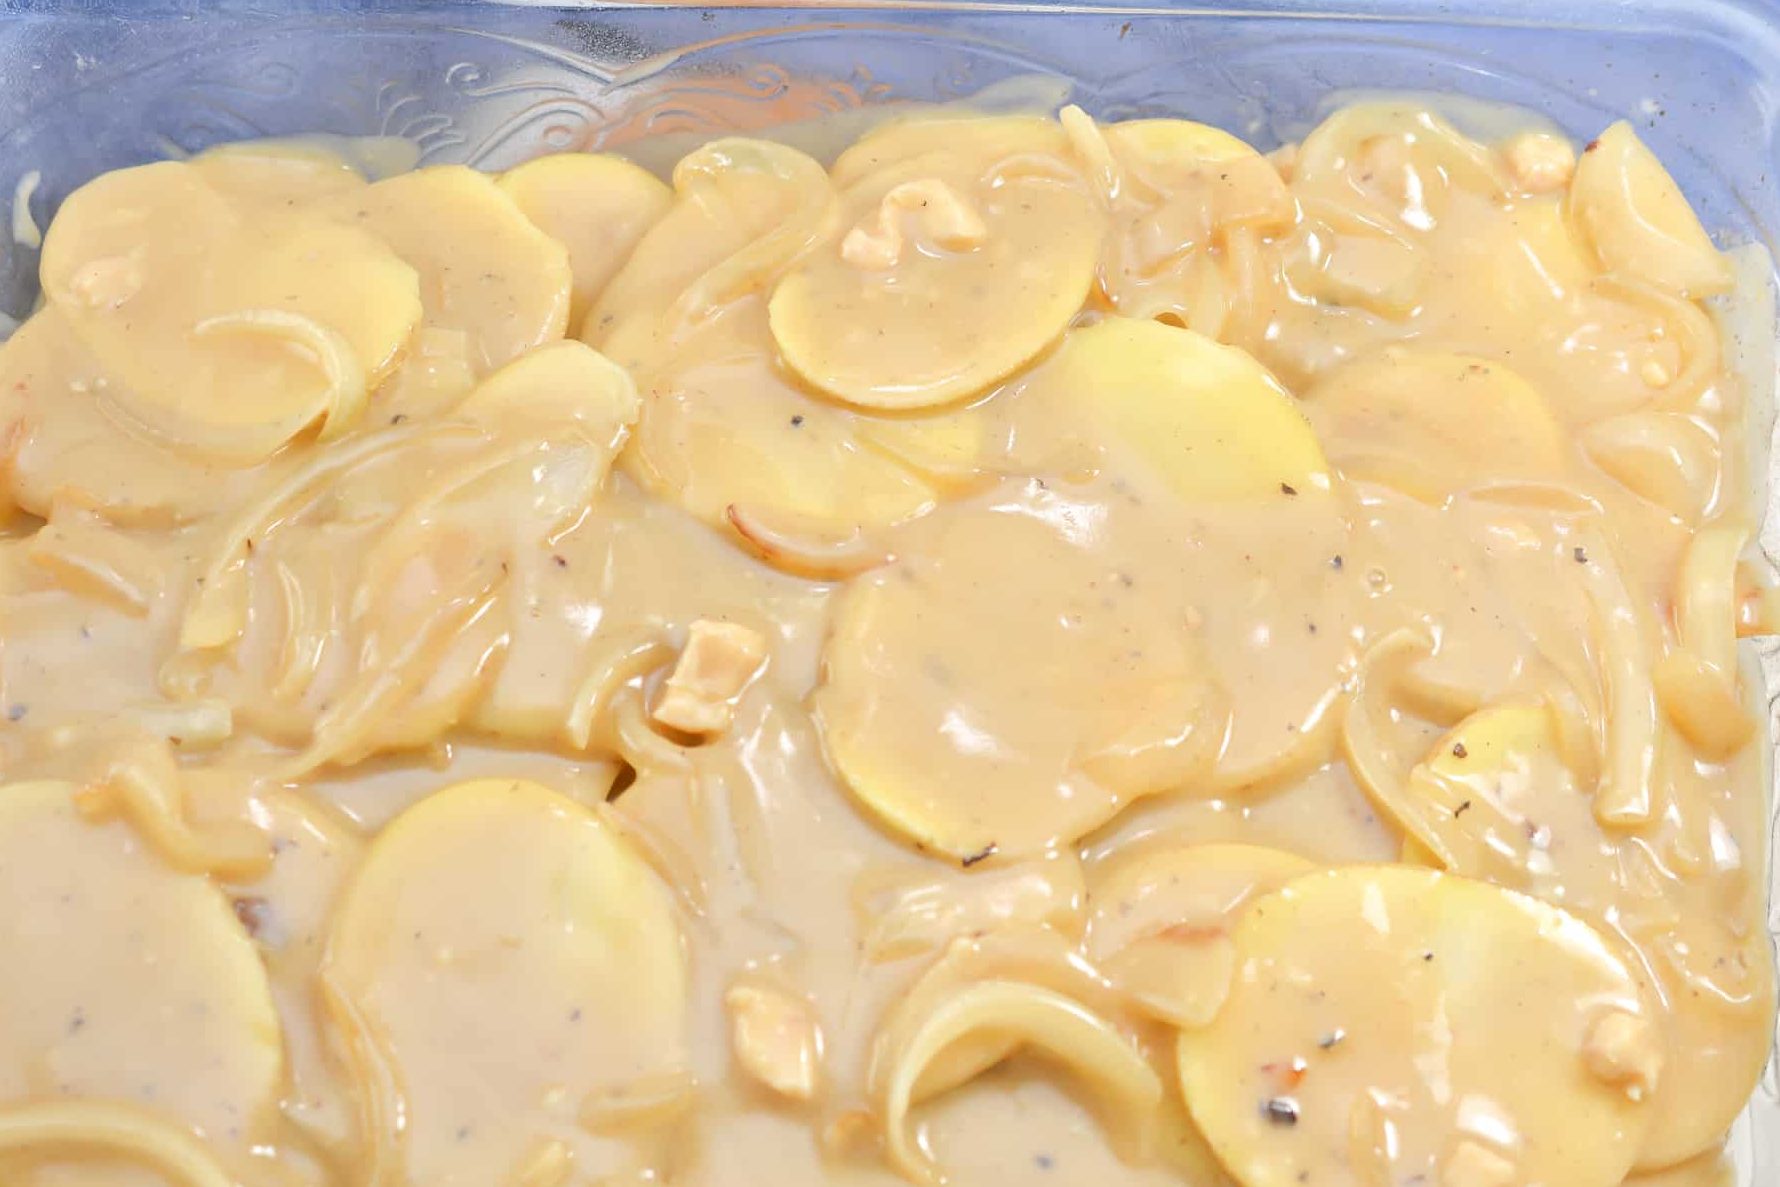 Pour the gravy mixture over the potatoes in the casserole dish.